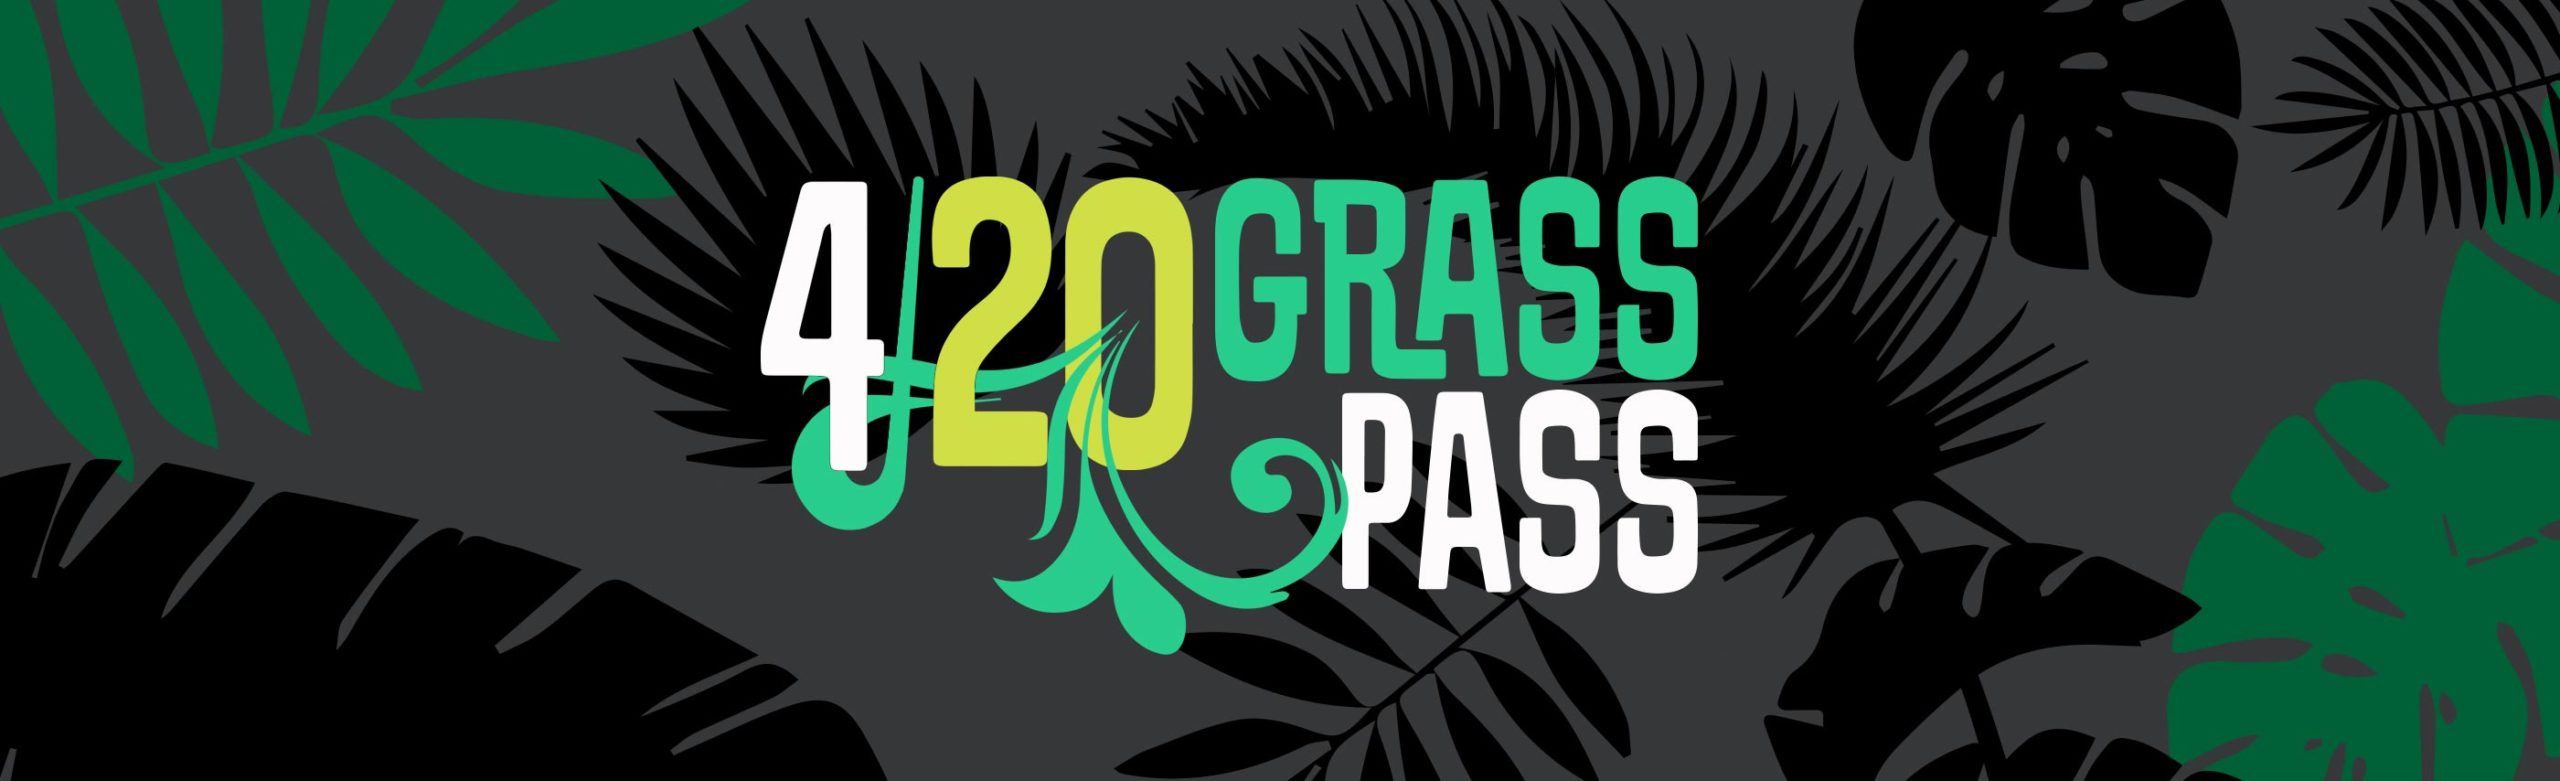 Special Offer: The 4/20 Grass Pass Image